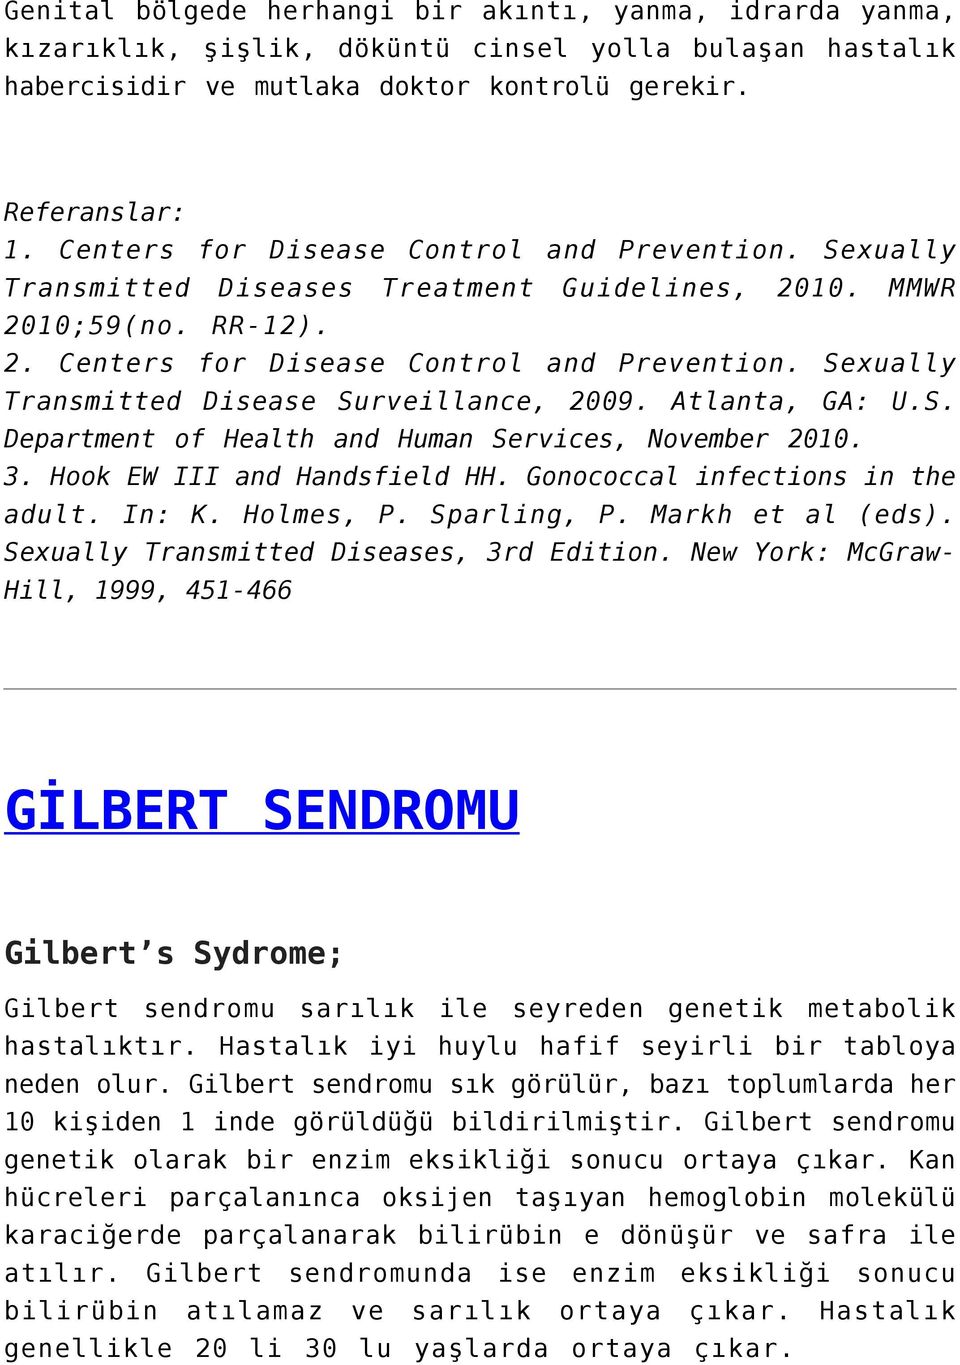 Sexually Transmitted Disease Surveillance, 2009. Atlanta, GA: U.S. Department of Health and Human Services, November 2010. 3. Hook EW III and Handsfield HH. Gonococcal infections in the adult. In: K.